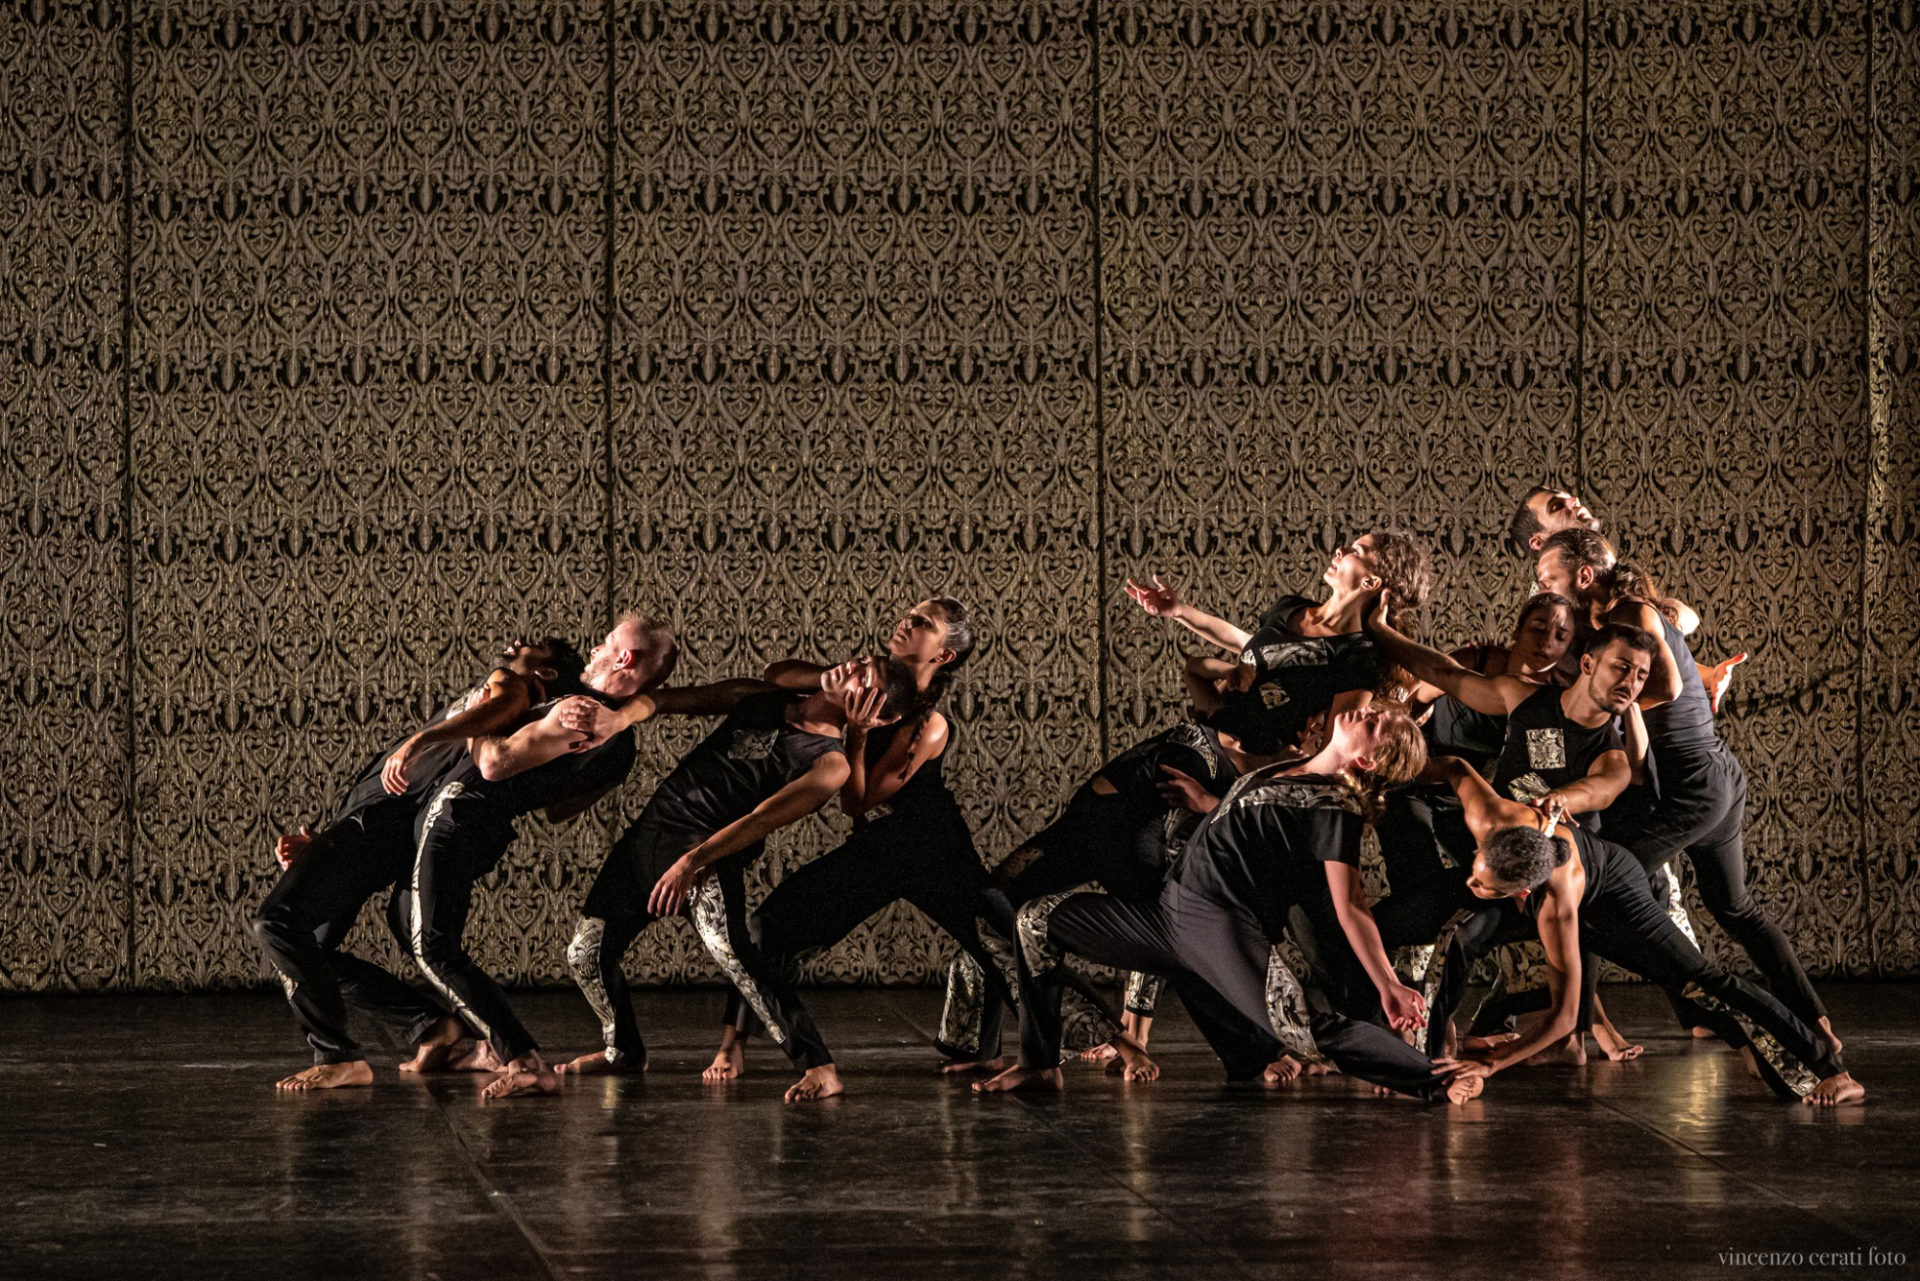 Approximately 12 people dancing on a dark stage, with a highly decorative black and gold backdrop. The dancers are men and women, wearing black outfits with gold details. They are in a group where some people are bending and leaning backward onto each other.